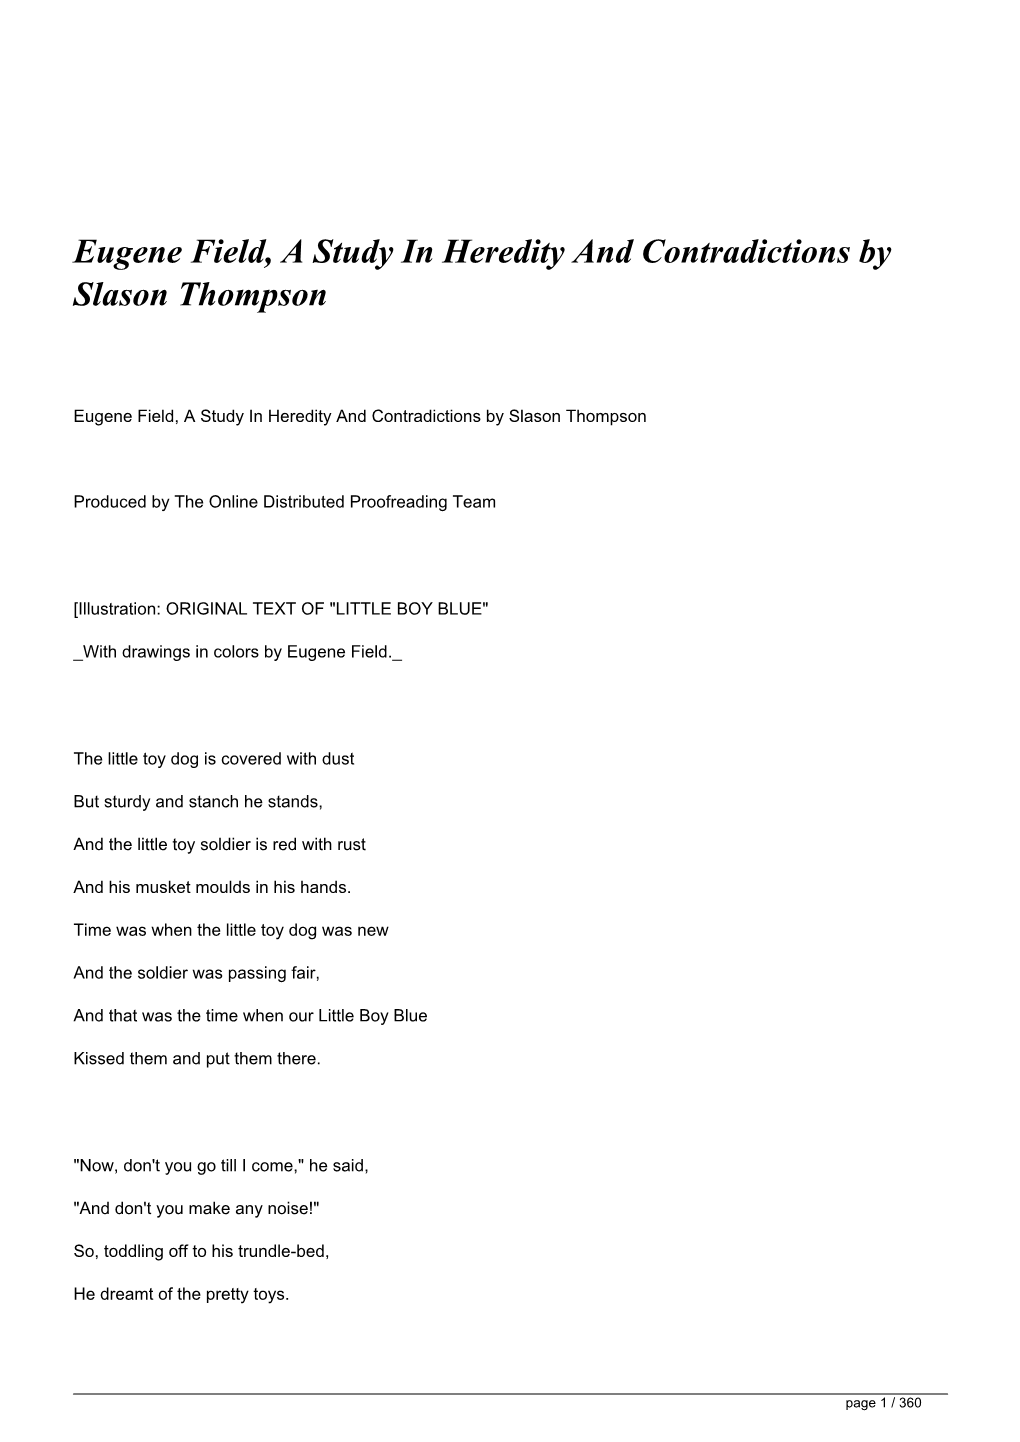 Eugene Field, a Study in Heredity and Contradictions by Slason Thompson&lt;/H1&gt;